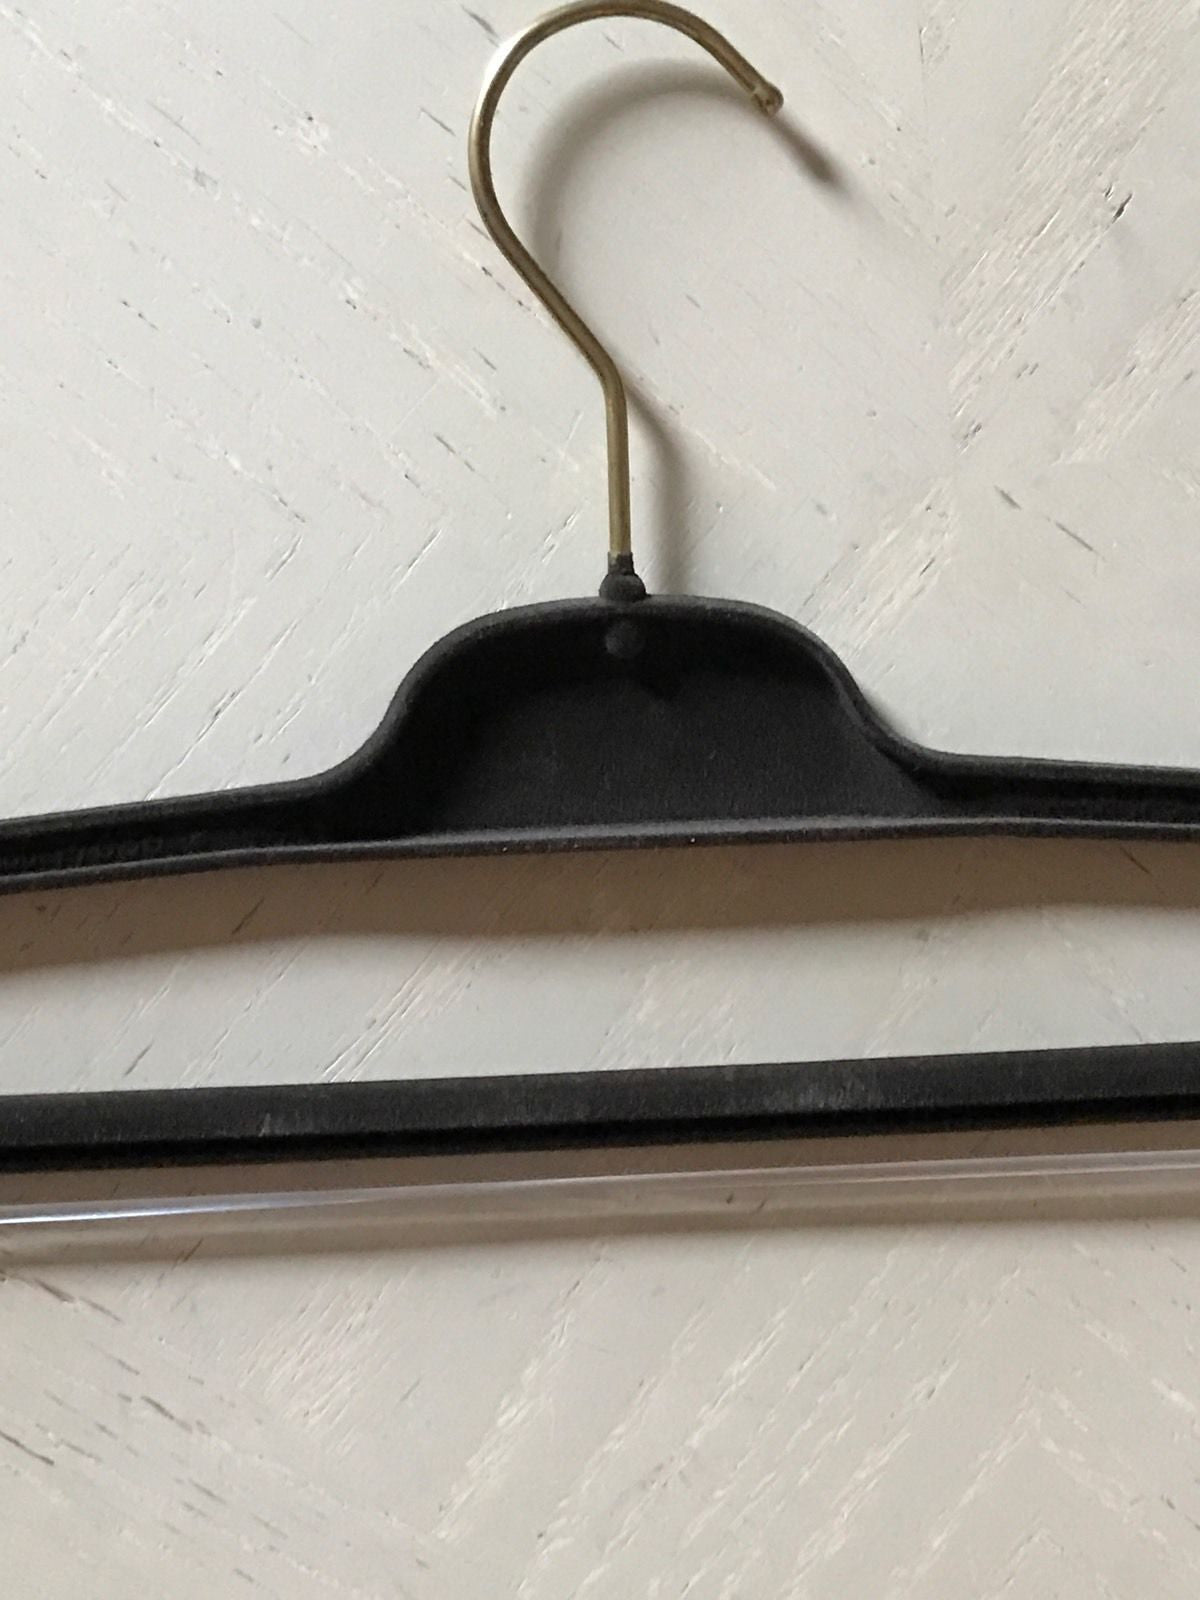 New Gucci Non-slip Brown Pants Hanger - BAYSUPERSTORE